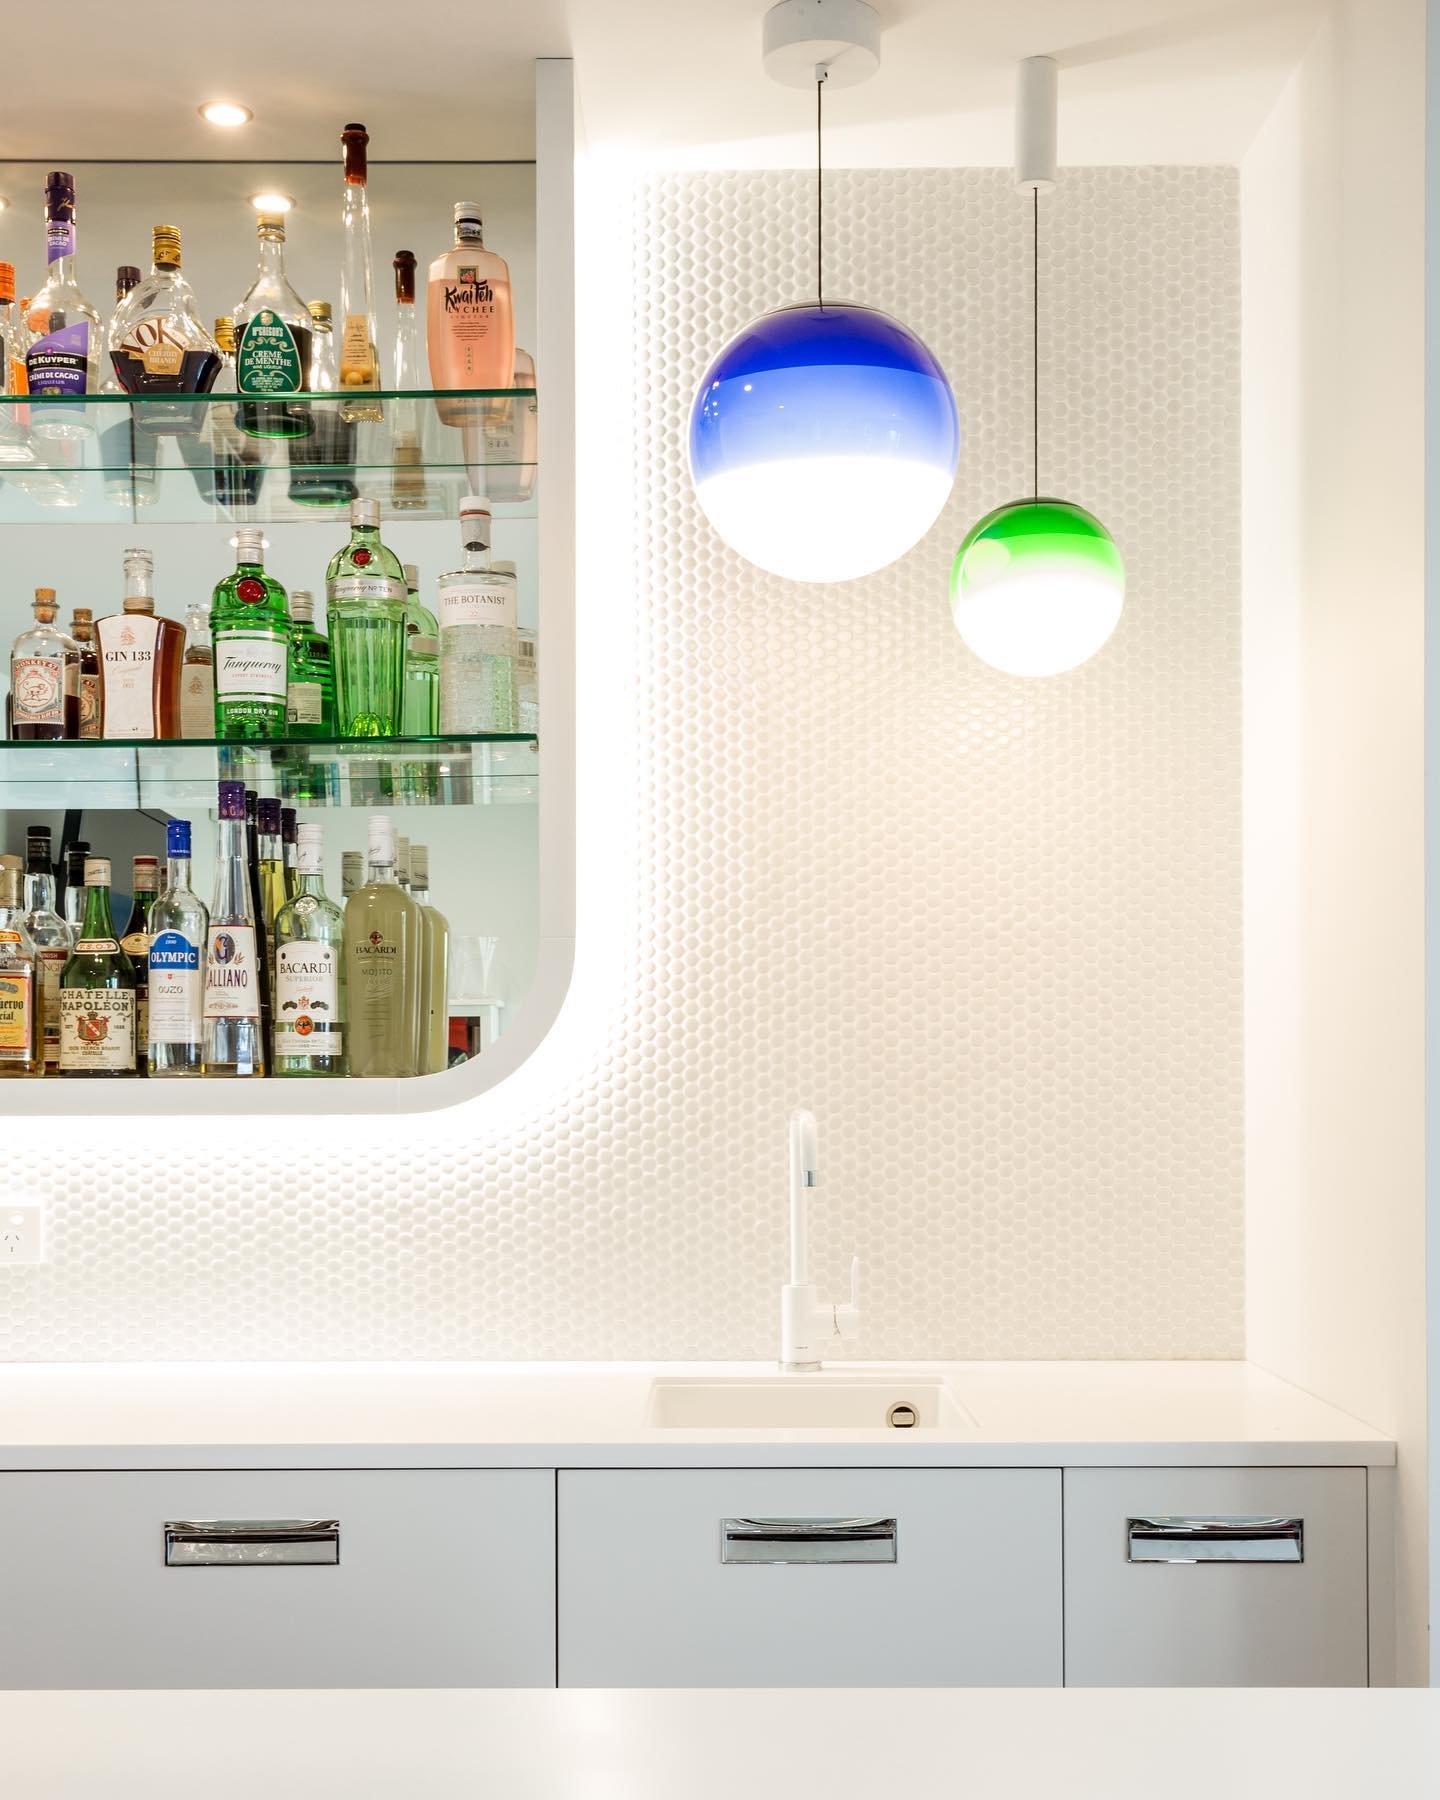 Reflecting on one of our all-time favorites, the Hillsborough Private Bar designed by our talented Auckland Designer, Peta Davy. This funky 1980s-inspired bar showcases the stunning Essence White Penny Round Mosaic Tile from @tilewarehousenz, which b